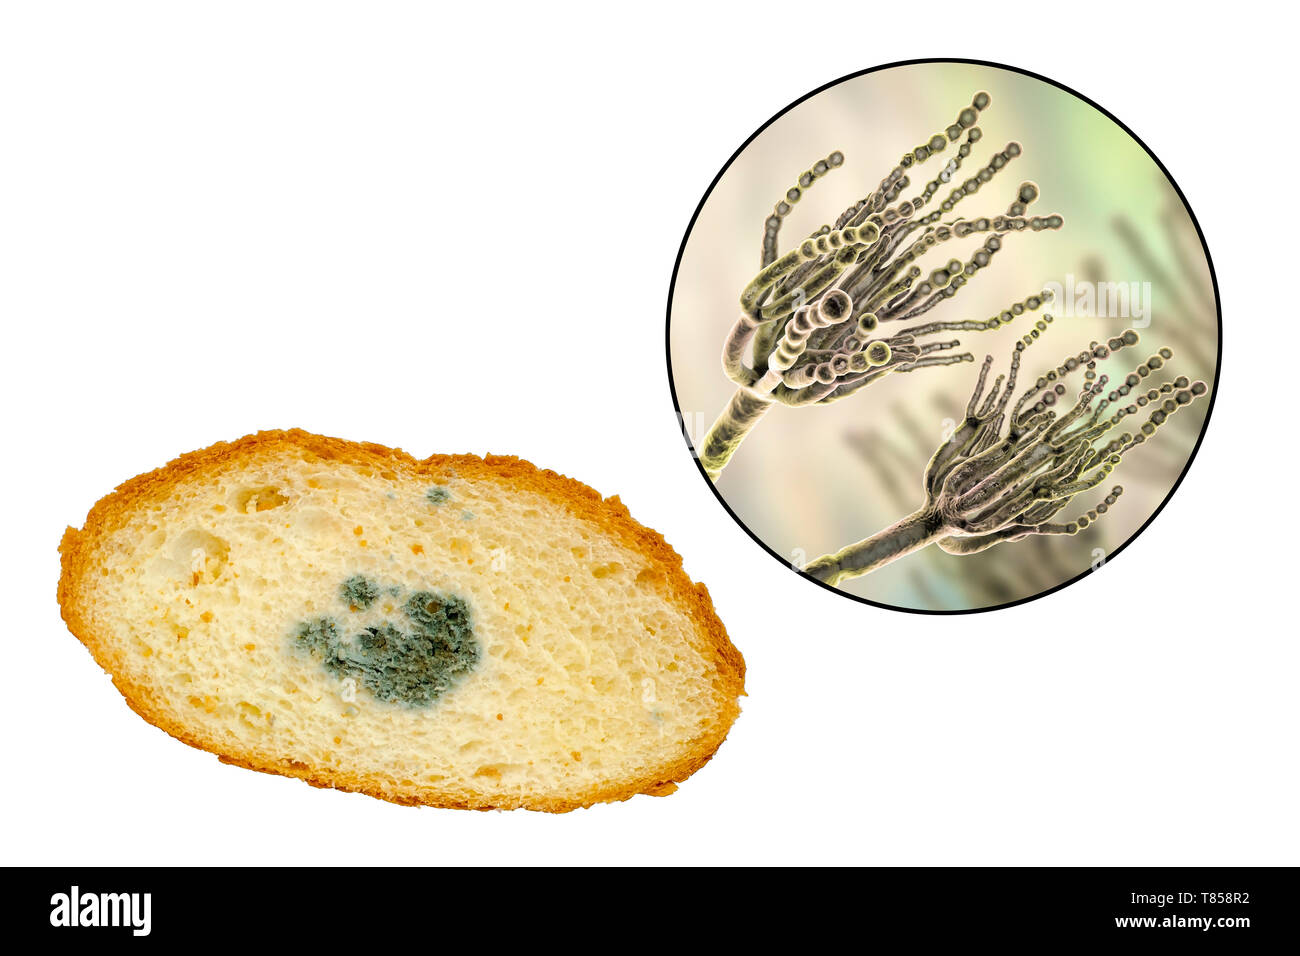 Bread with mould, composite image Stock Photo